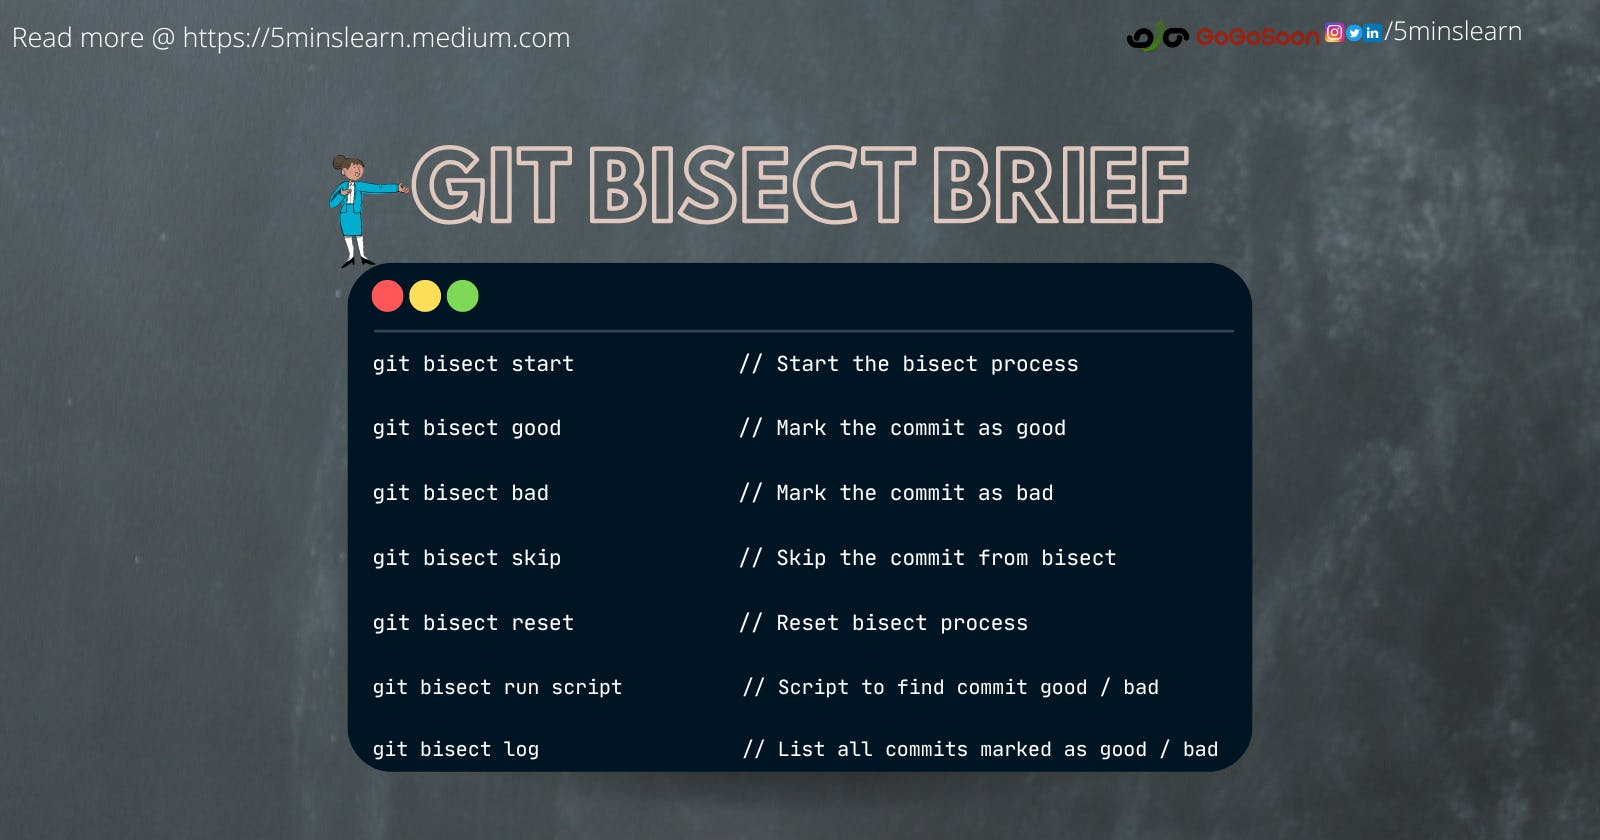 Spot the culprit commit with Git Bisect